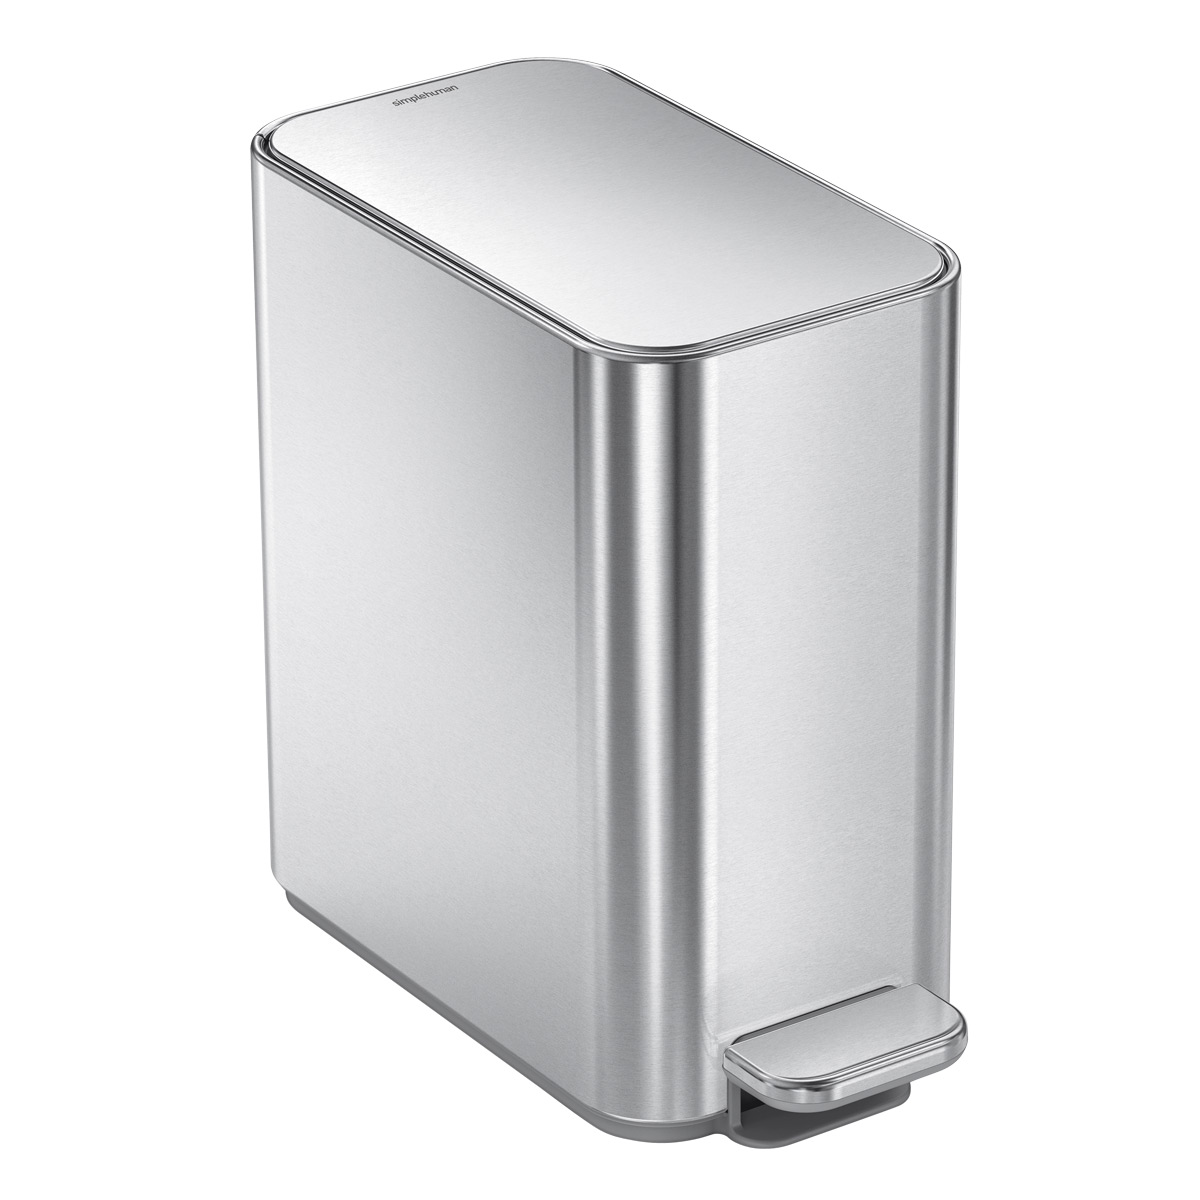 https://www.containerstore.com/catalogimages/473517/10091730-sh-slim-can-silver-ven1.jpg